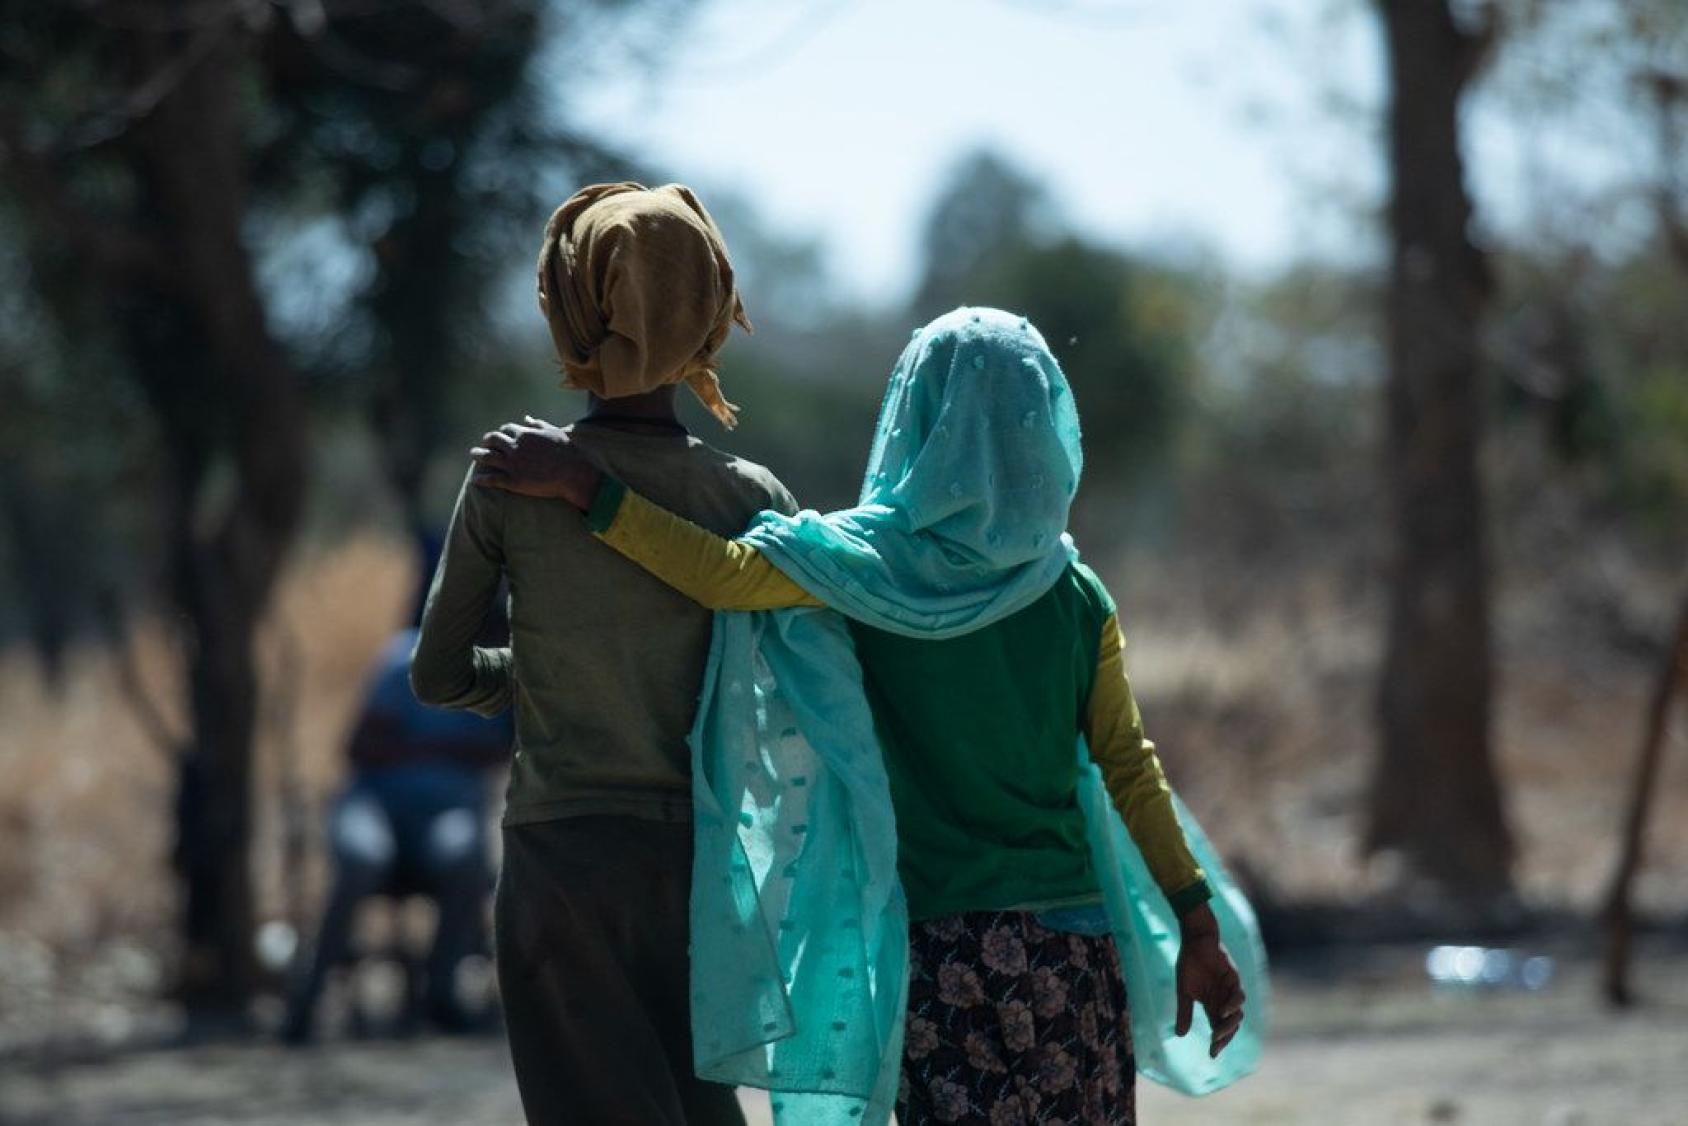 Two girls wearing headscarves from Ethiopia are photographed from behind walking down the street, one with her arm around the other's shoulder.